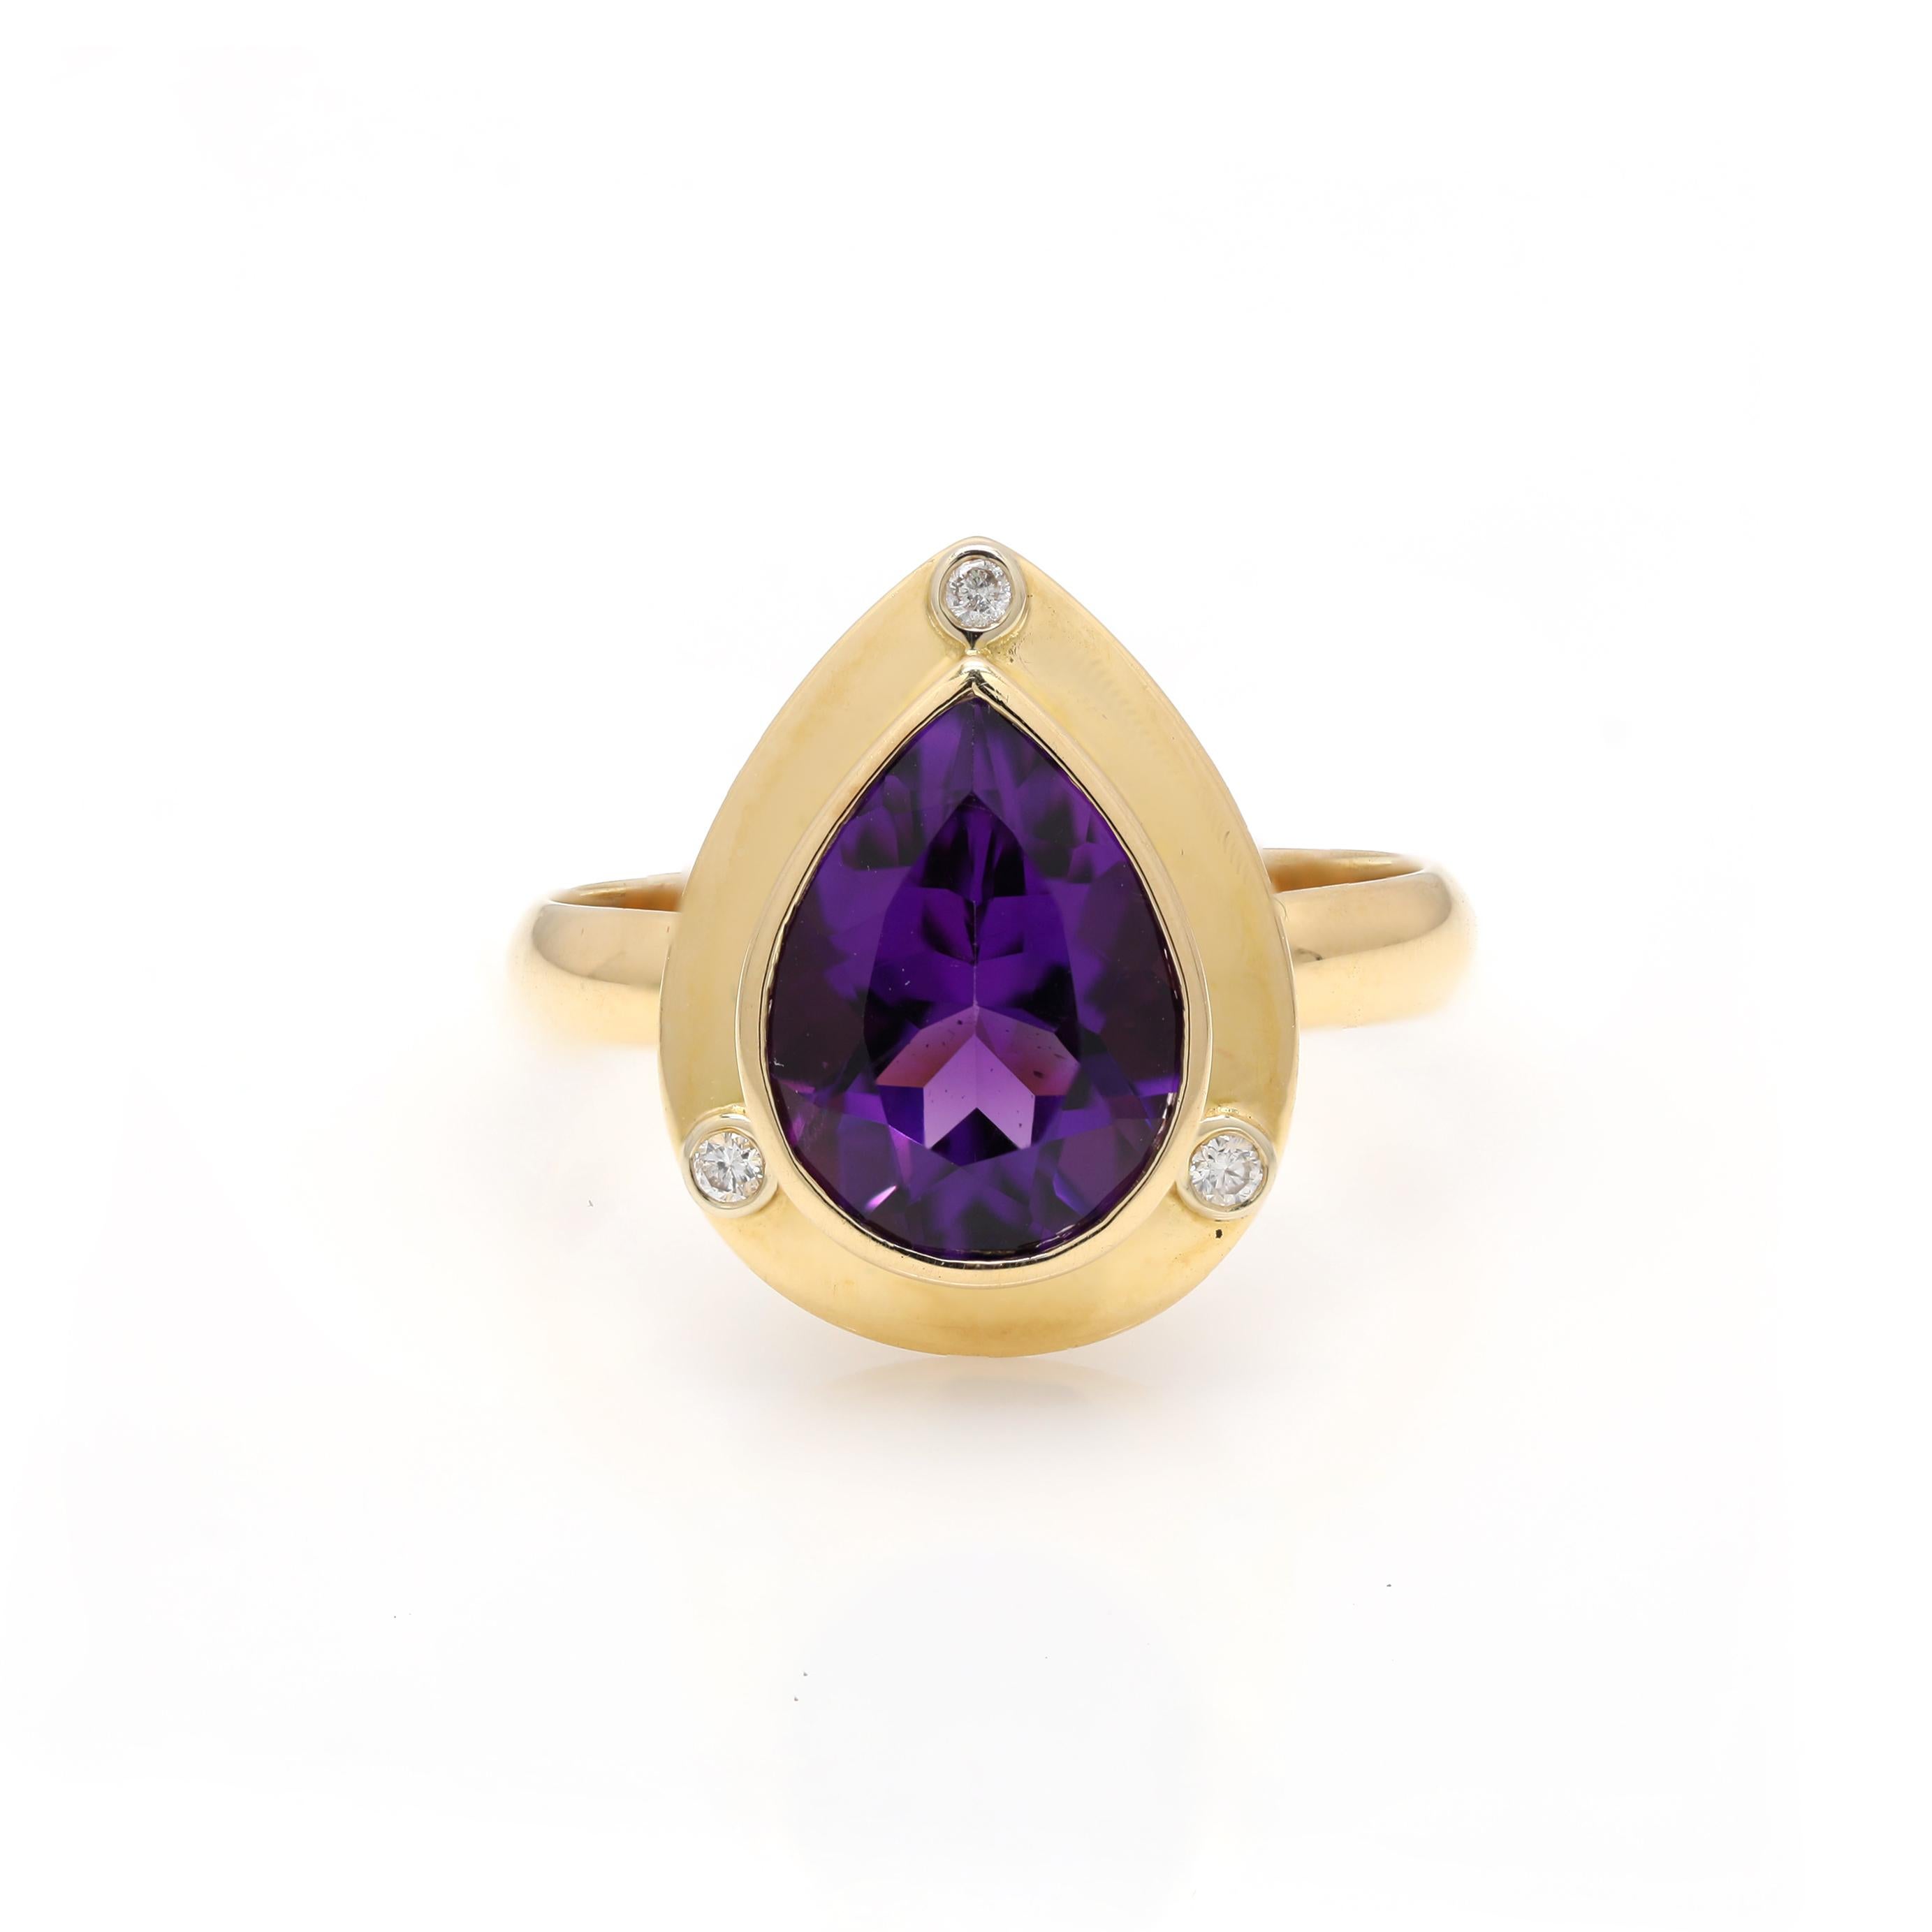 For Sale:  Estelar 2.45ct Amethyst Ring with Diamonds Mounted with 18k Yellow Gold 3